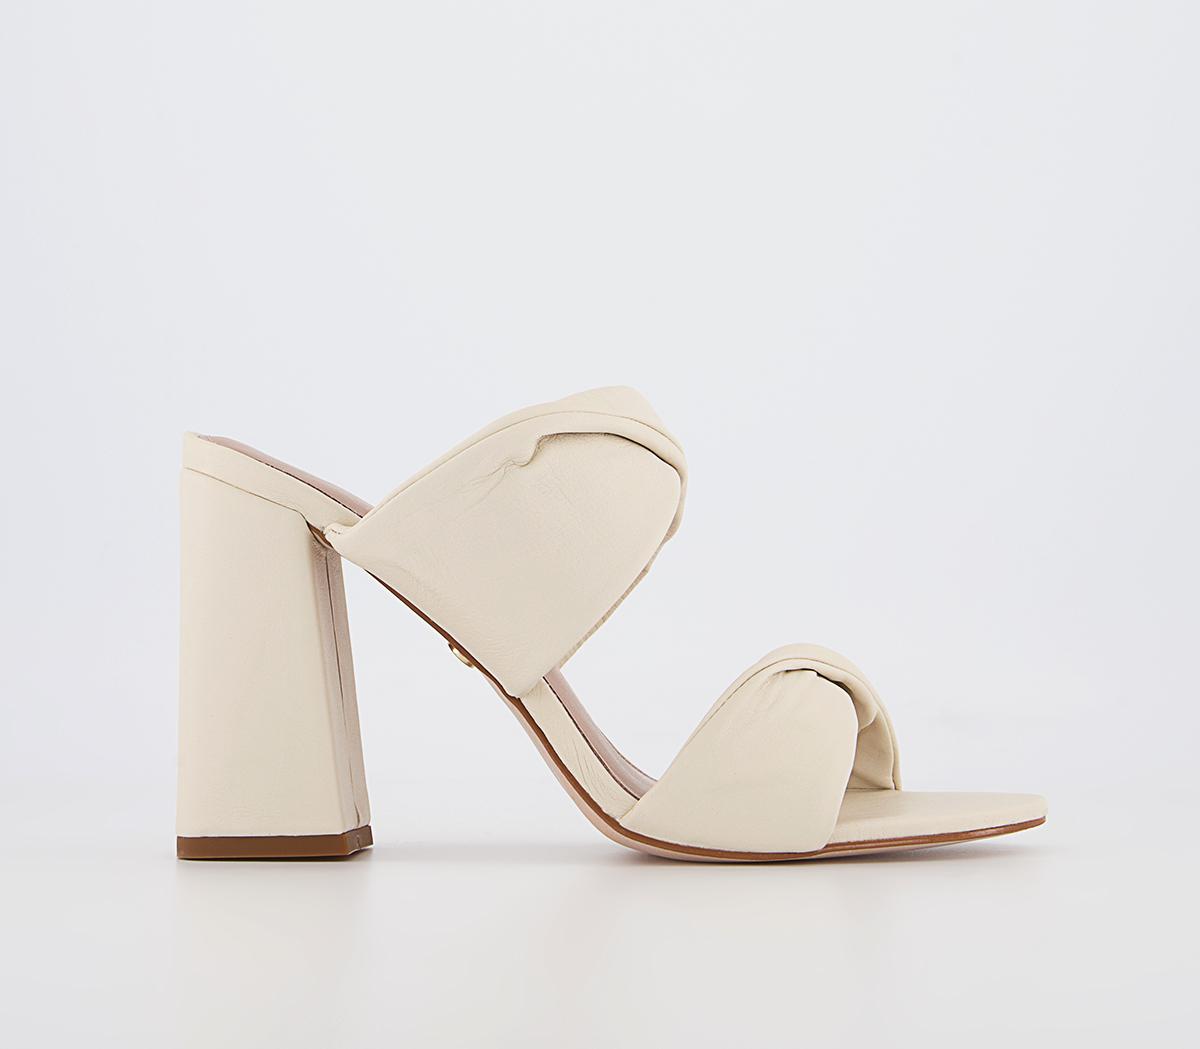 OFFICEMarcy Twist Two Strap MulesOff White Leather